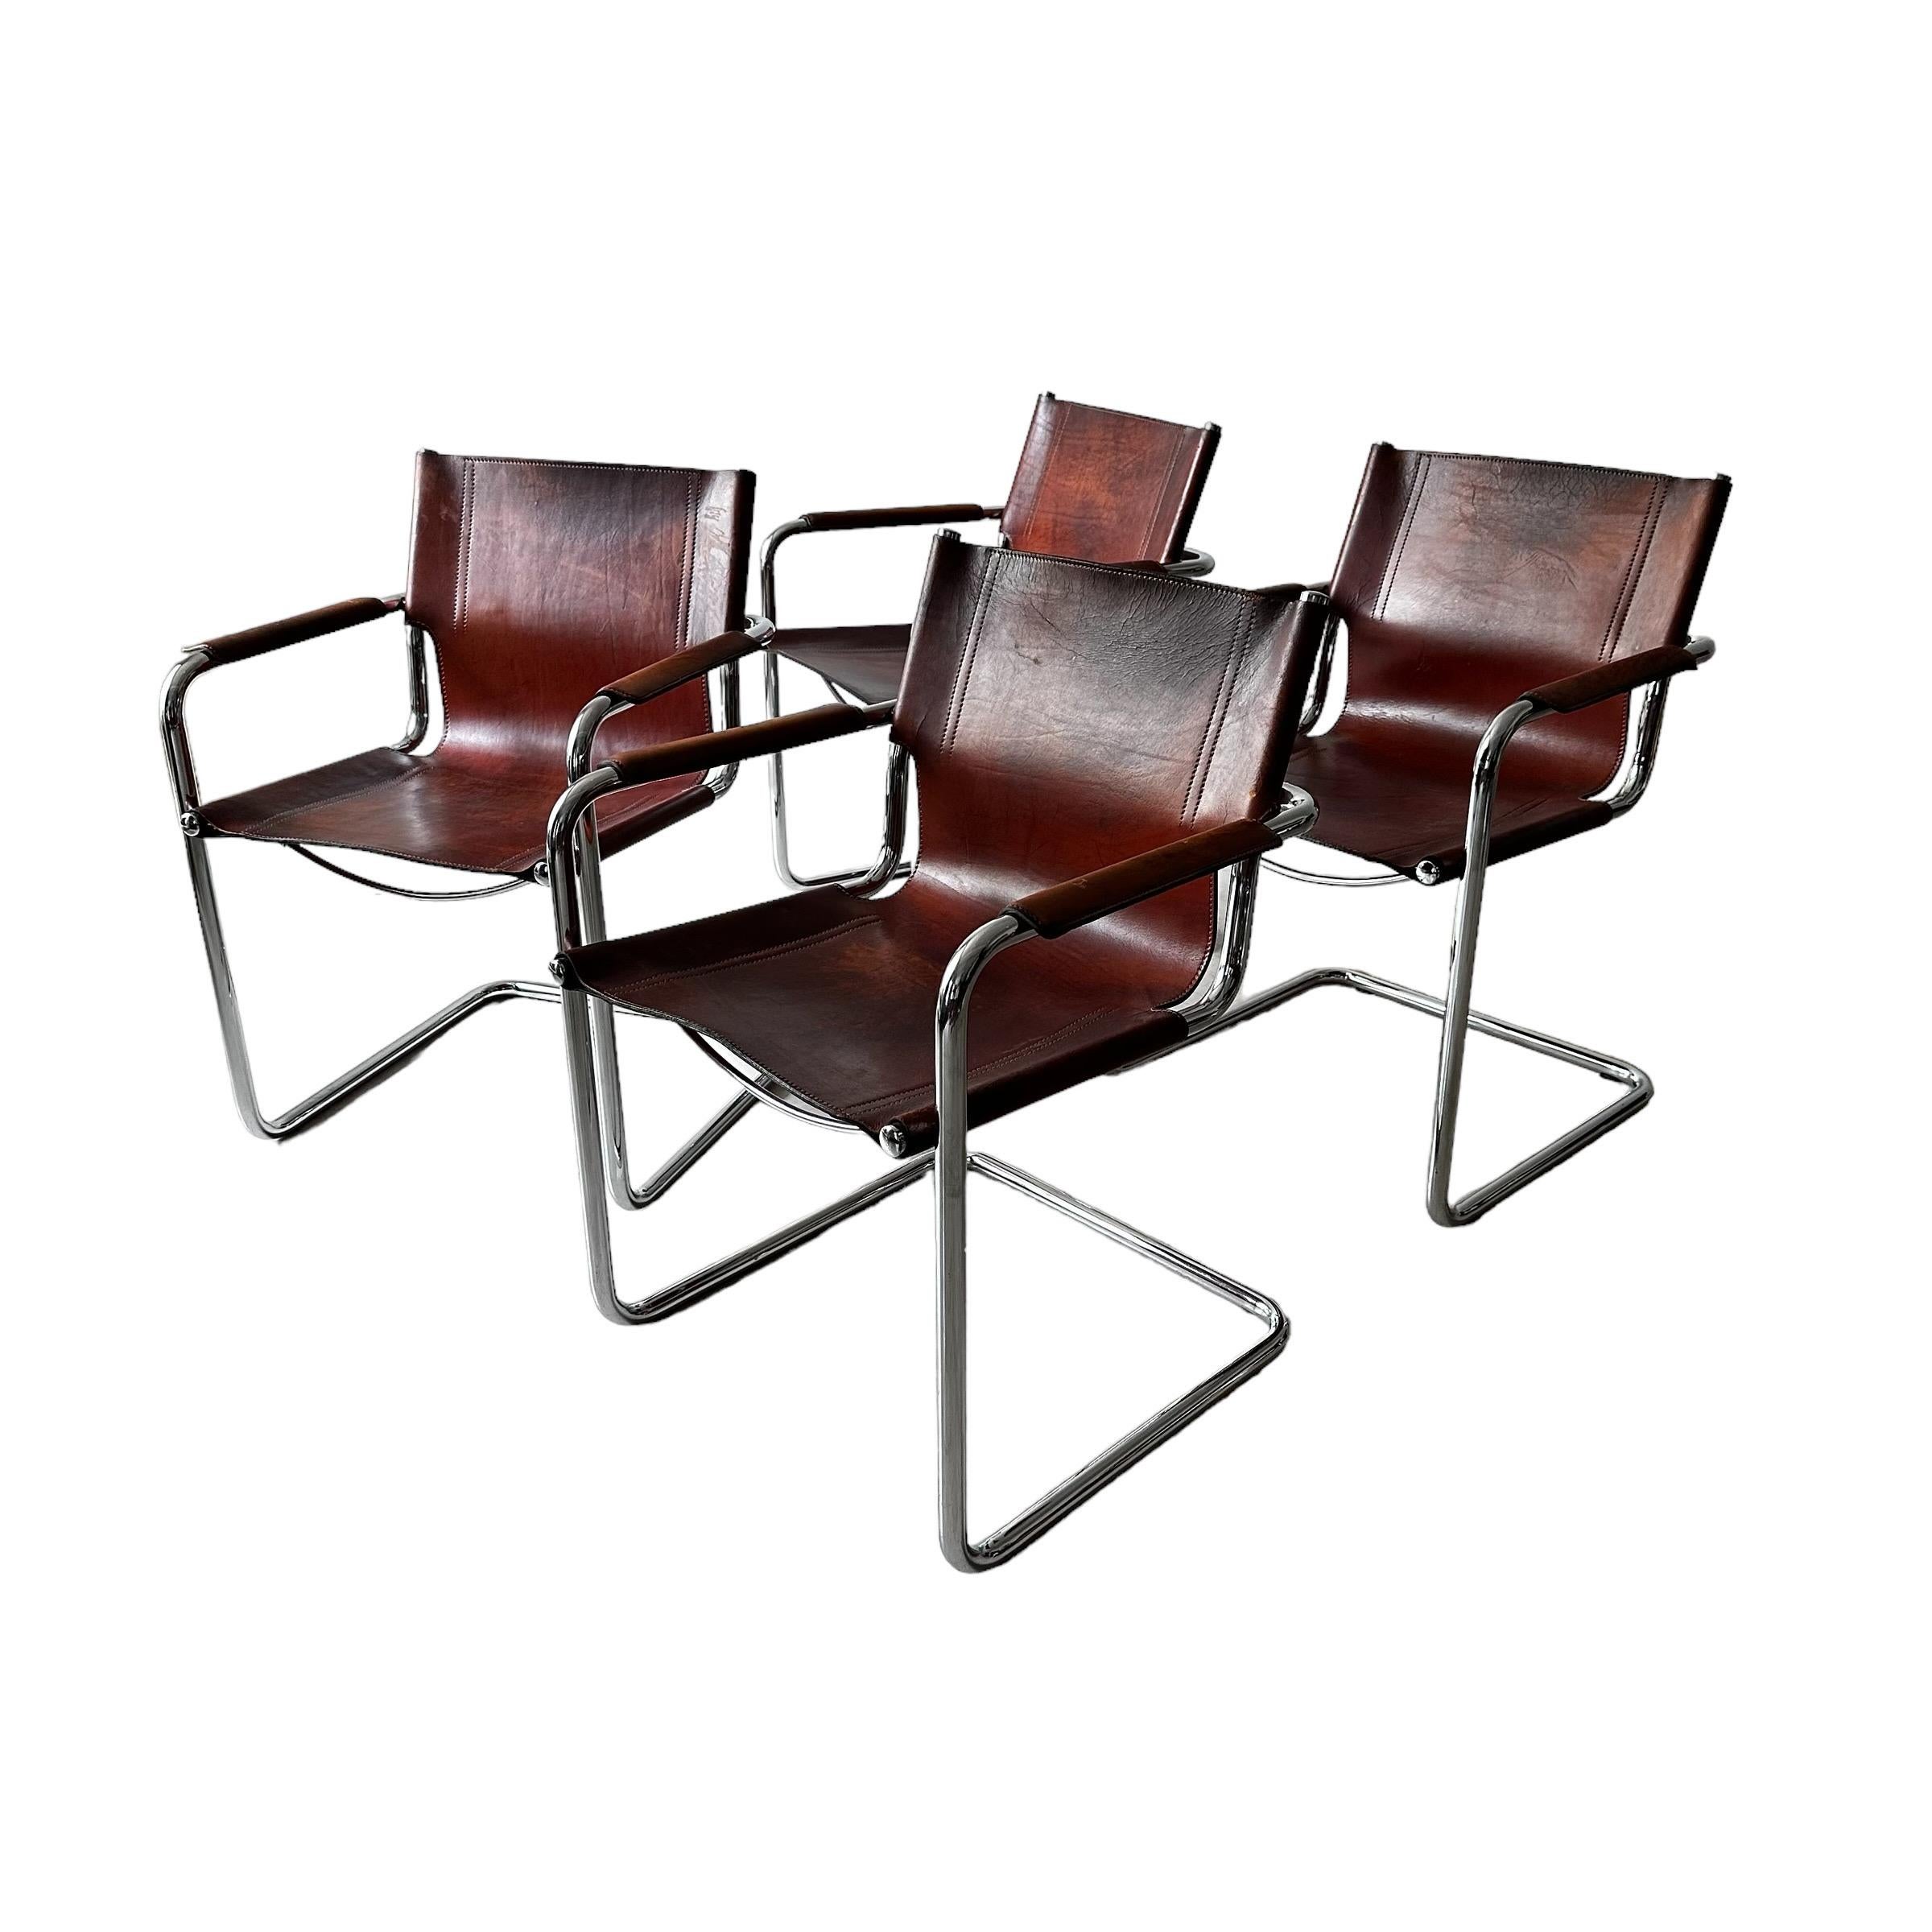 Mid-Century Modern Matteo Grassi, Set of 4 Armchairs in Patinated Cognac Leather, Italy 1970s For Sale